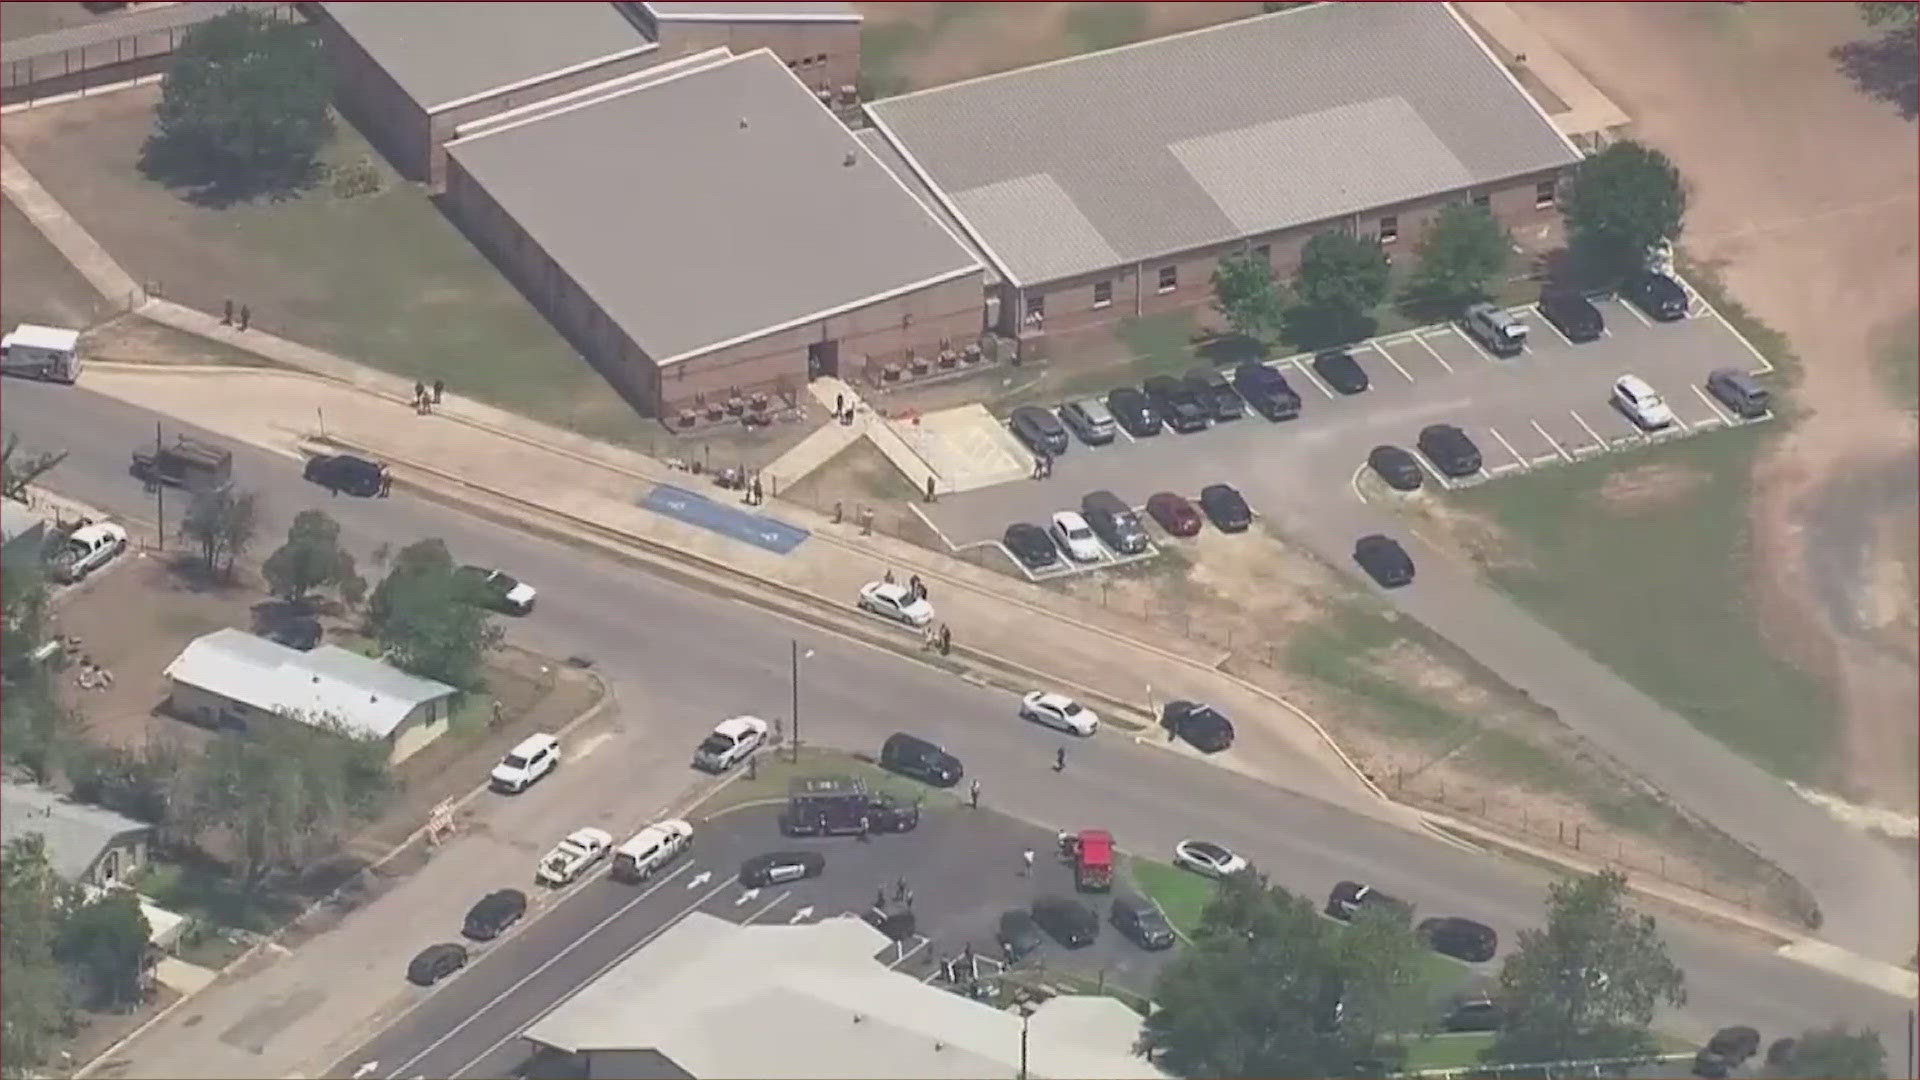 KVUE News has learned a Uvalde grand jury returned two indictments in connection to the 2022 mass shooting at Robb Elementary School.